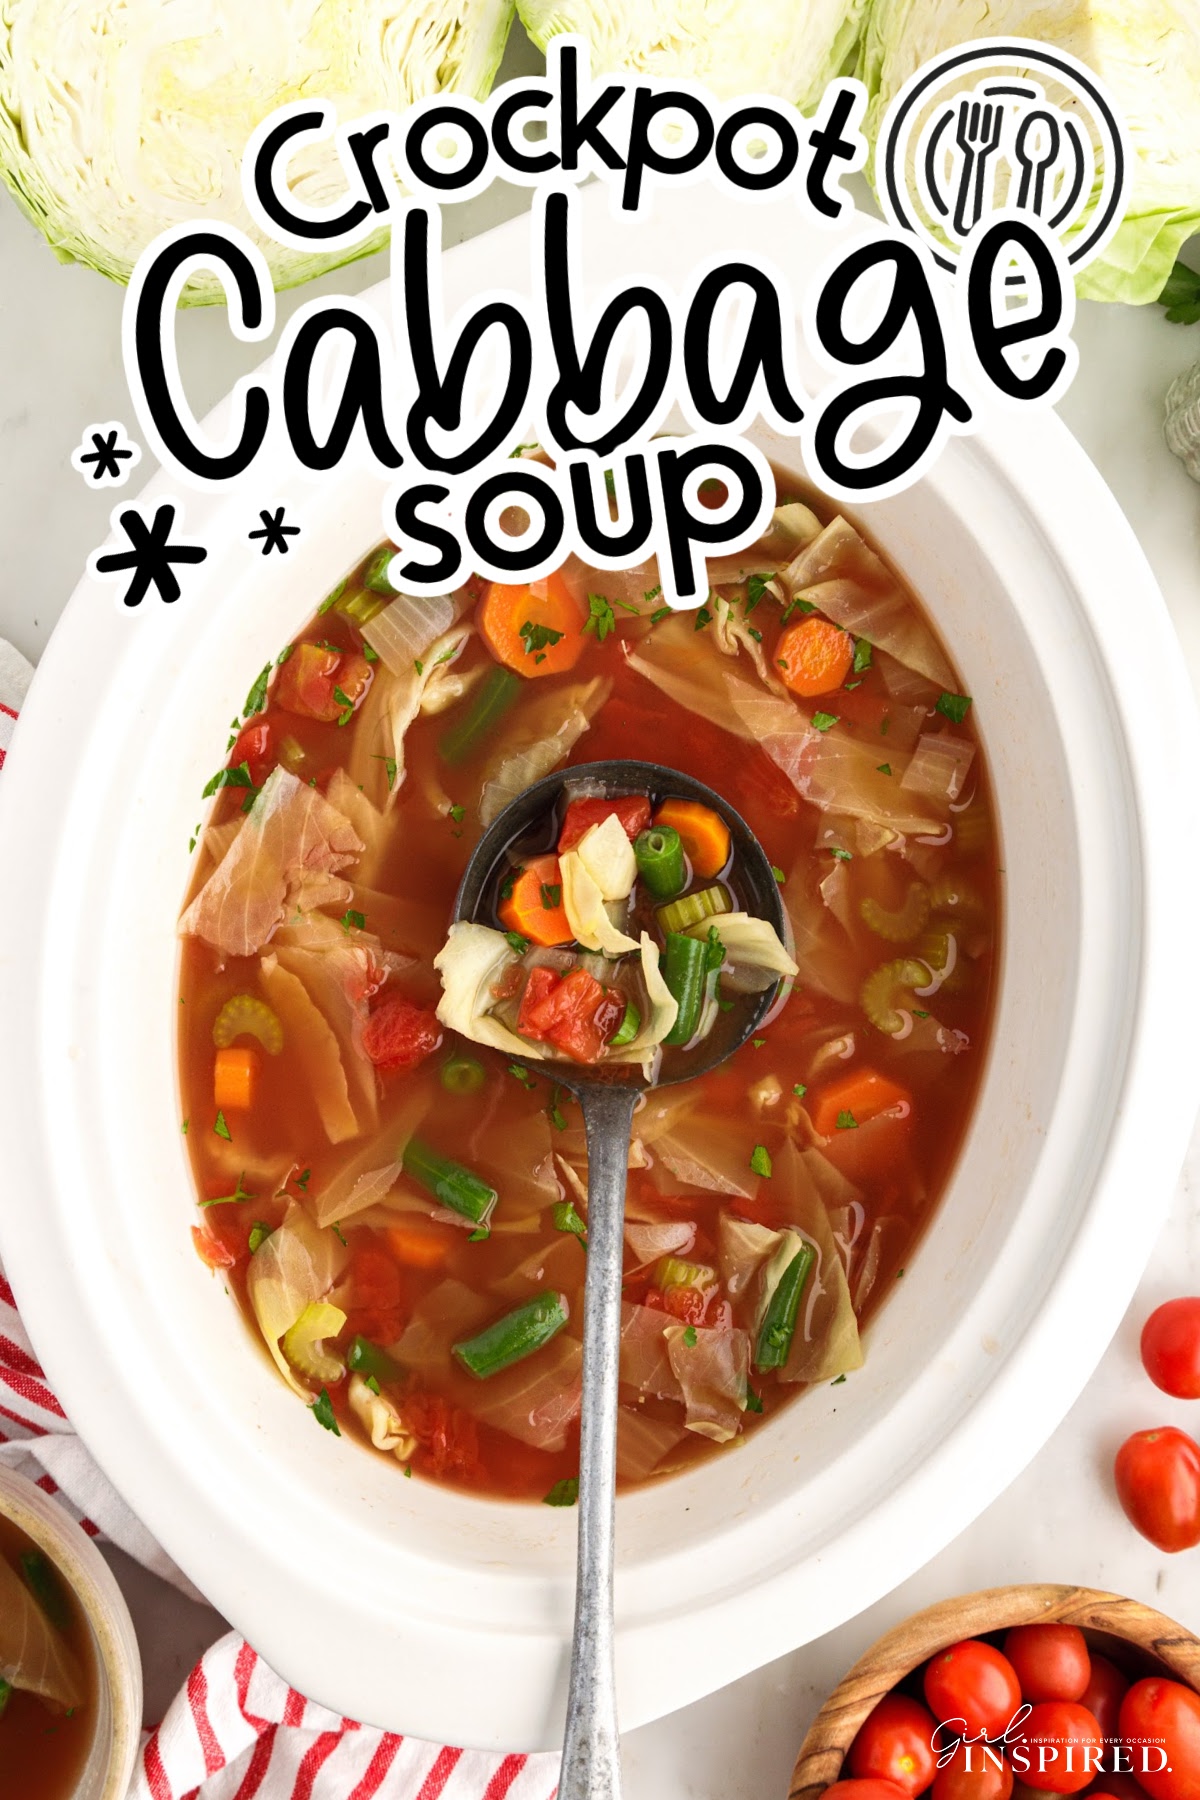 Overhead view of a crockpot full of Crockpot Cabbage Soup with text overlay.